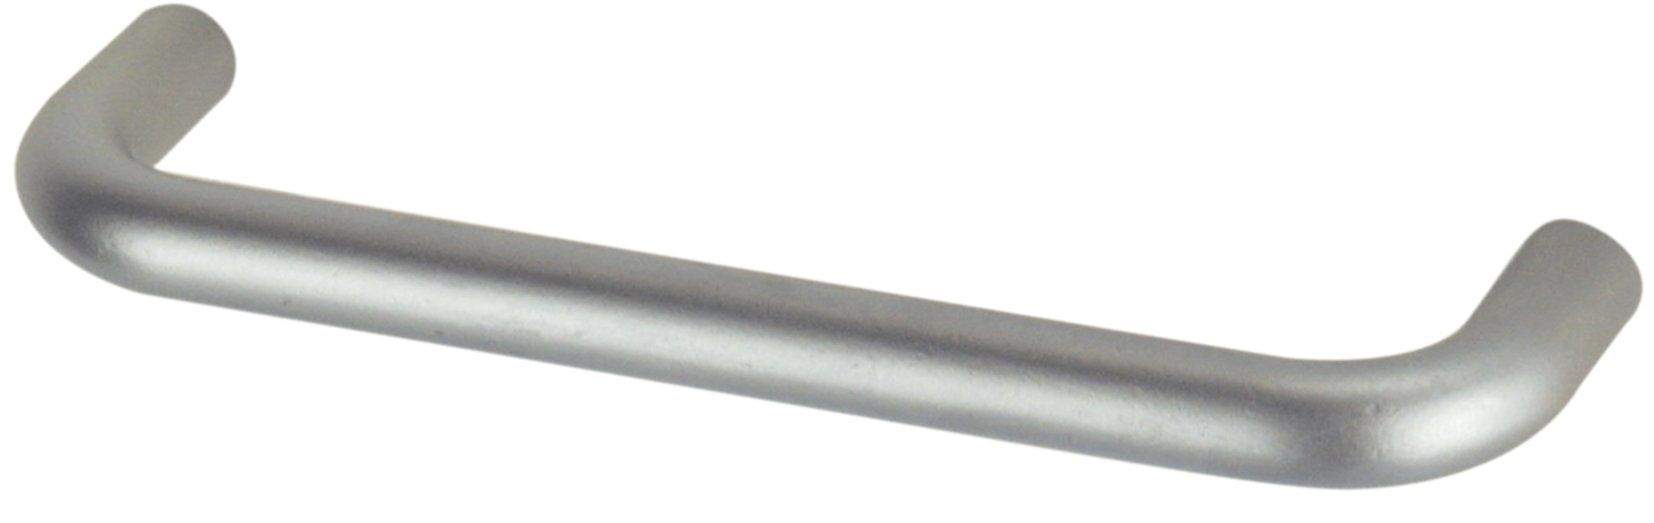 Wire handle with chrome-plated steel insert, W.136mm, D.8mm, D.28mm, 128mm pitch, 1 piece with screws.